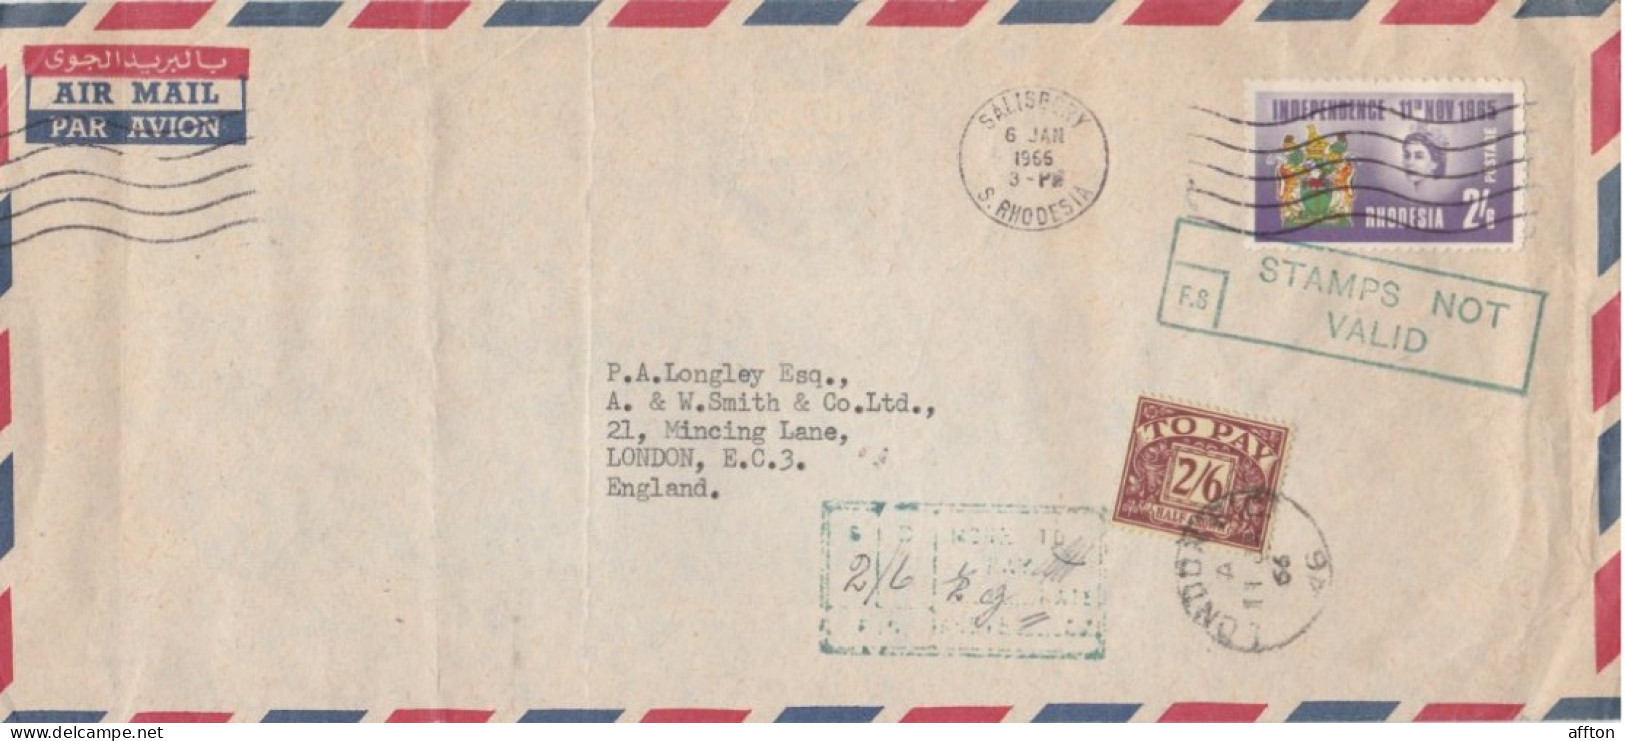 Rhodesia 1966 Cover Mailed Stamps Not Valid Postage Due - Rhodesia (1964-1980)